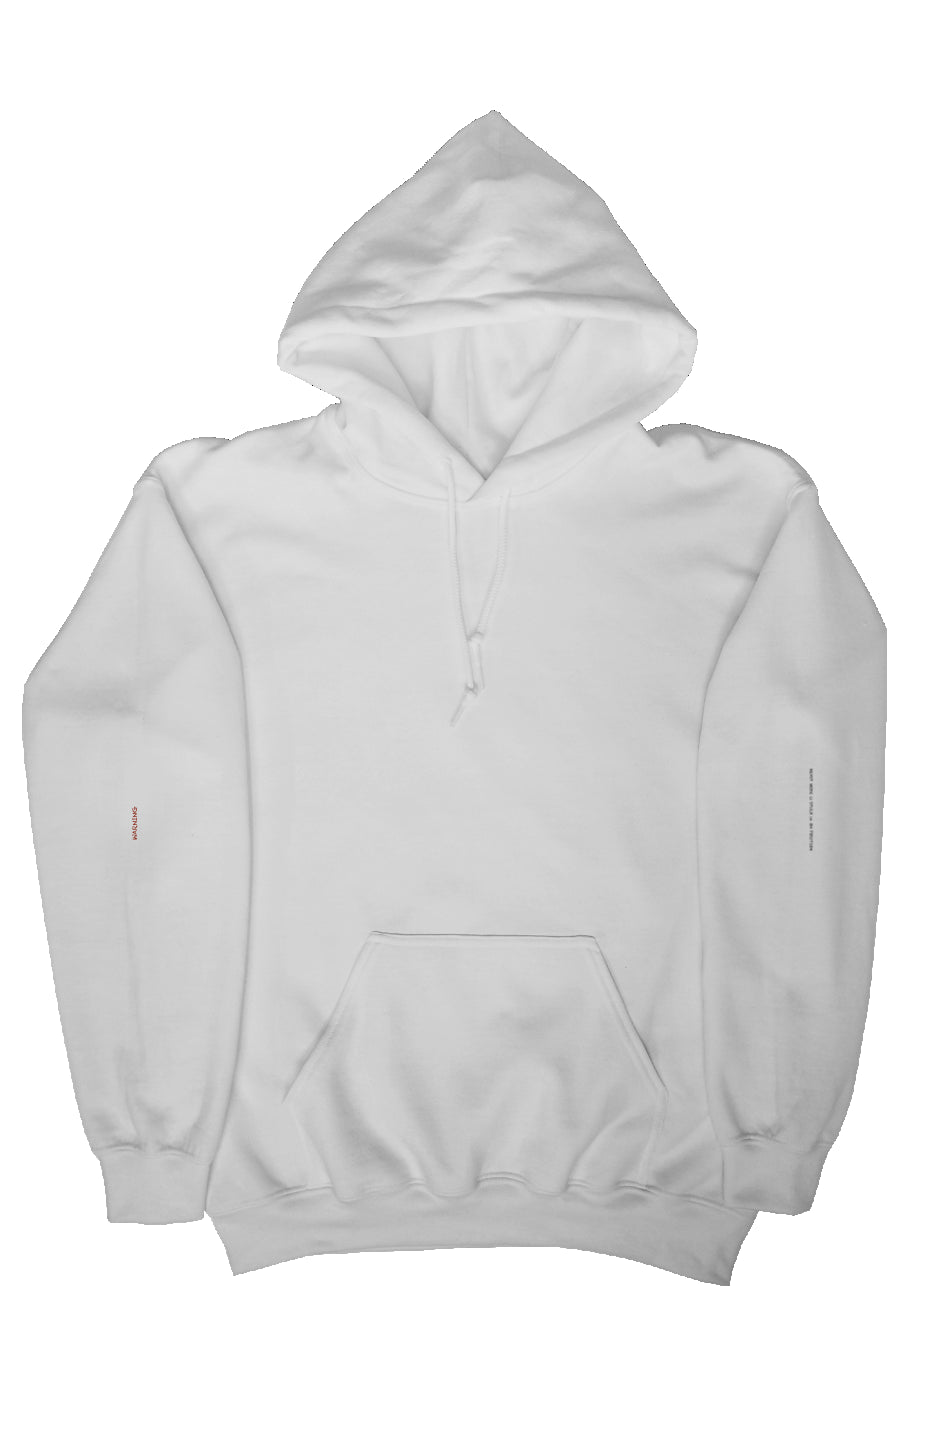 Black and White Logo with Logo Liner inside Hoodie